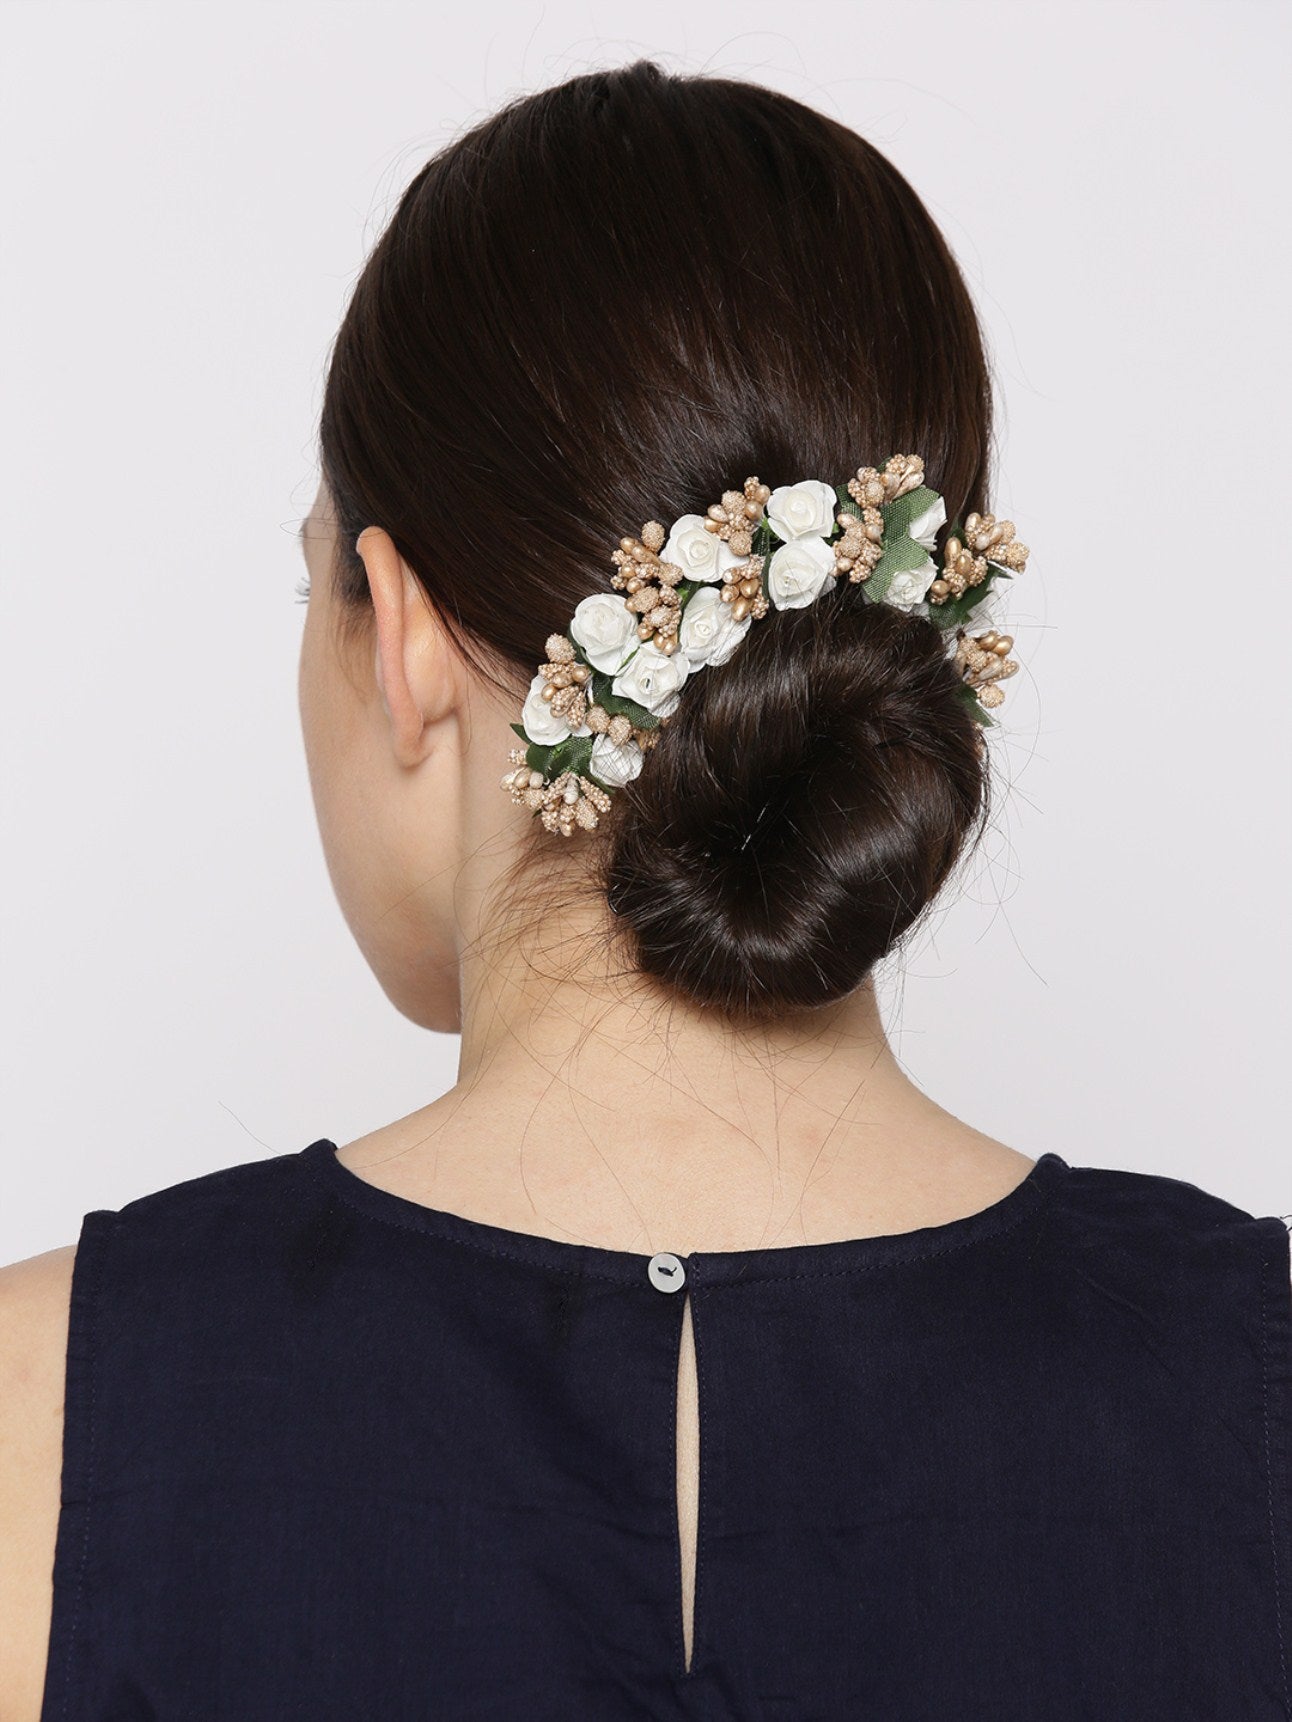 Moti And Flower White and Red Floral Hair Accessories